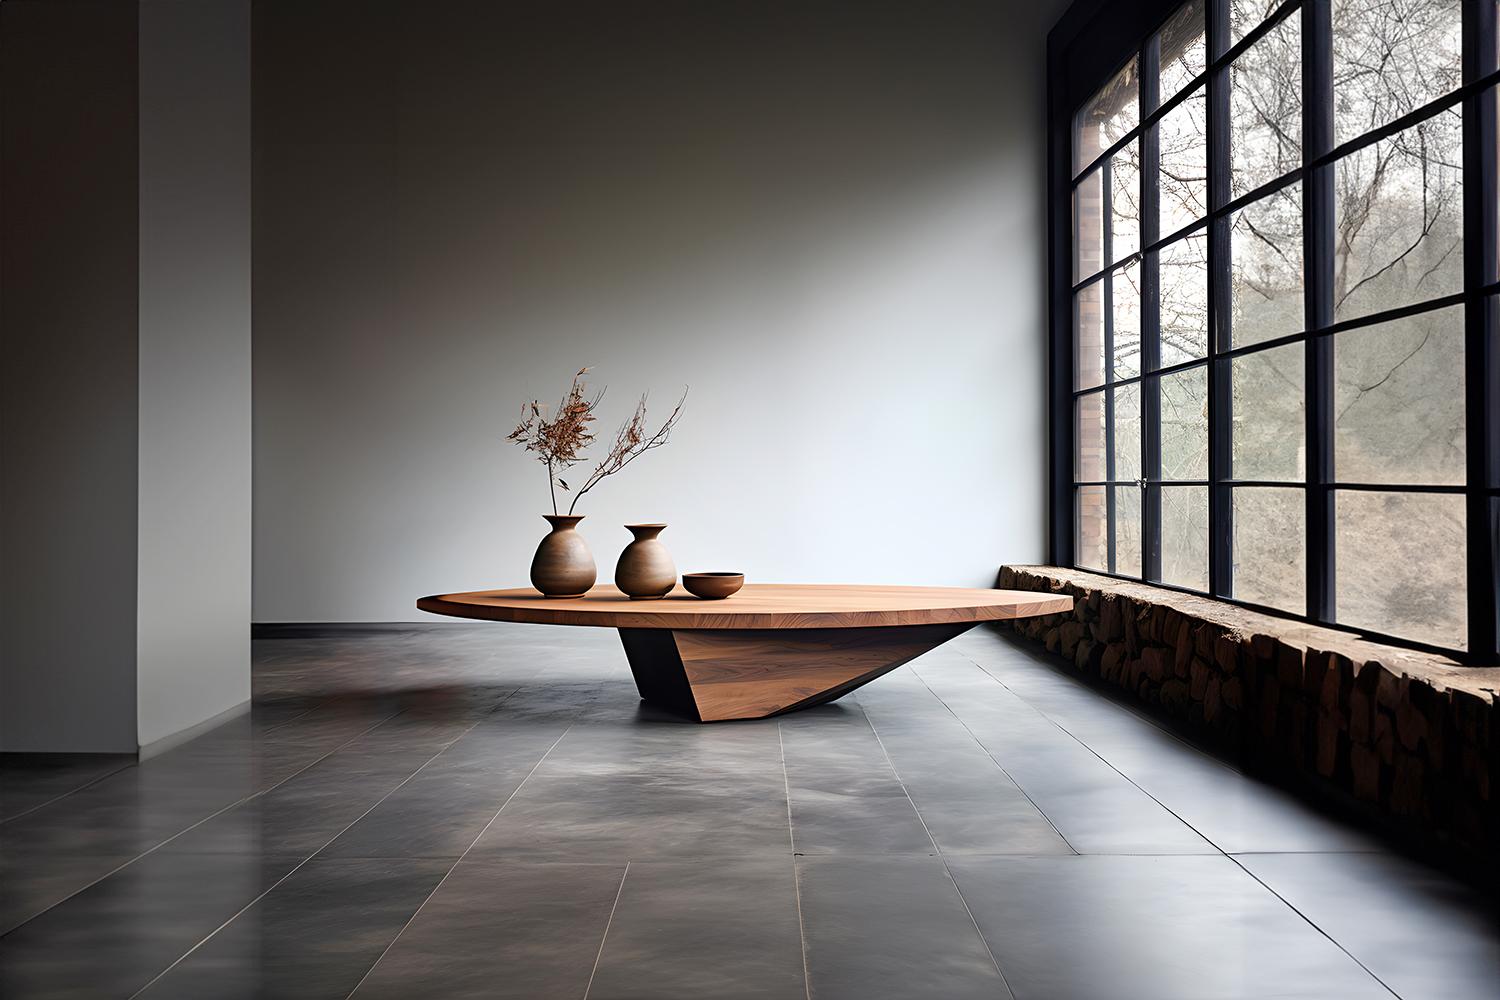 Round Coffee Table Made of Solid Wood, Center Table Solace S14 by Joel Escalona


The Solace table series, designed by Joel Escalona, is a furniture collection that exudes balance and presence, thanks to its sensuous, dense, and irregular shapes.